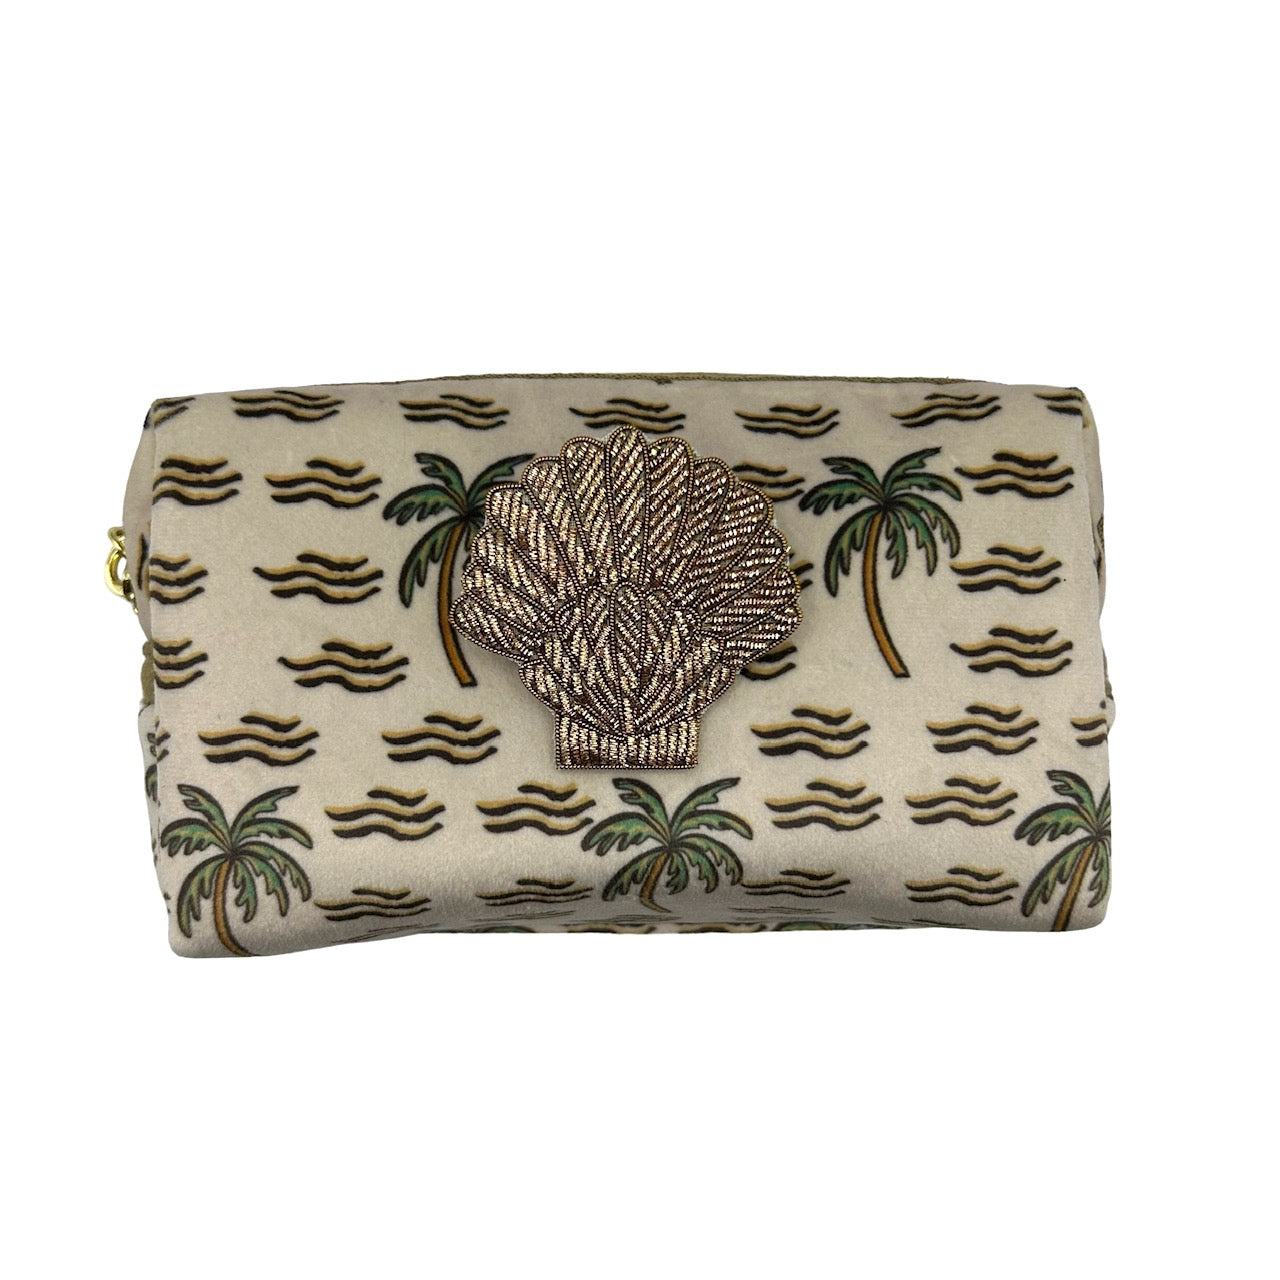 Sand palm make-up bag & gold shell brooch - recycled velvet, large and small